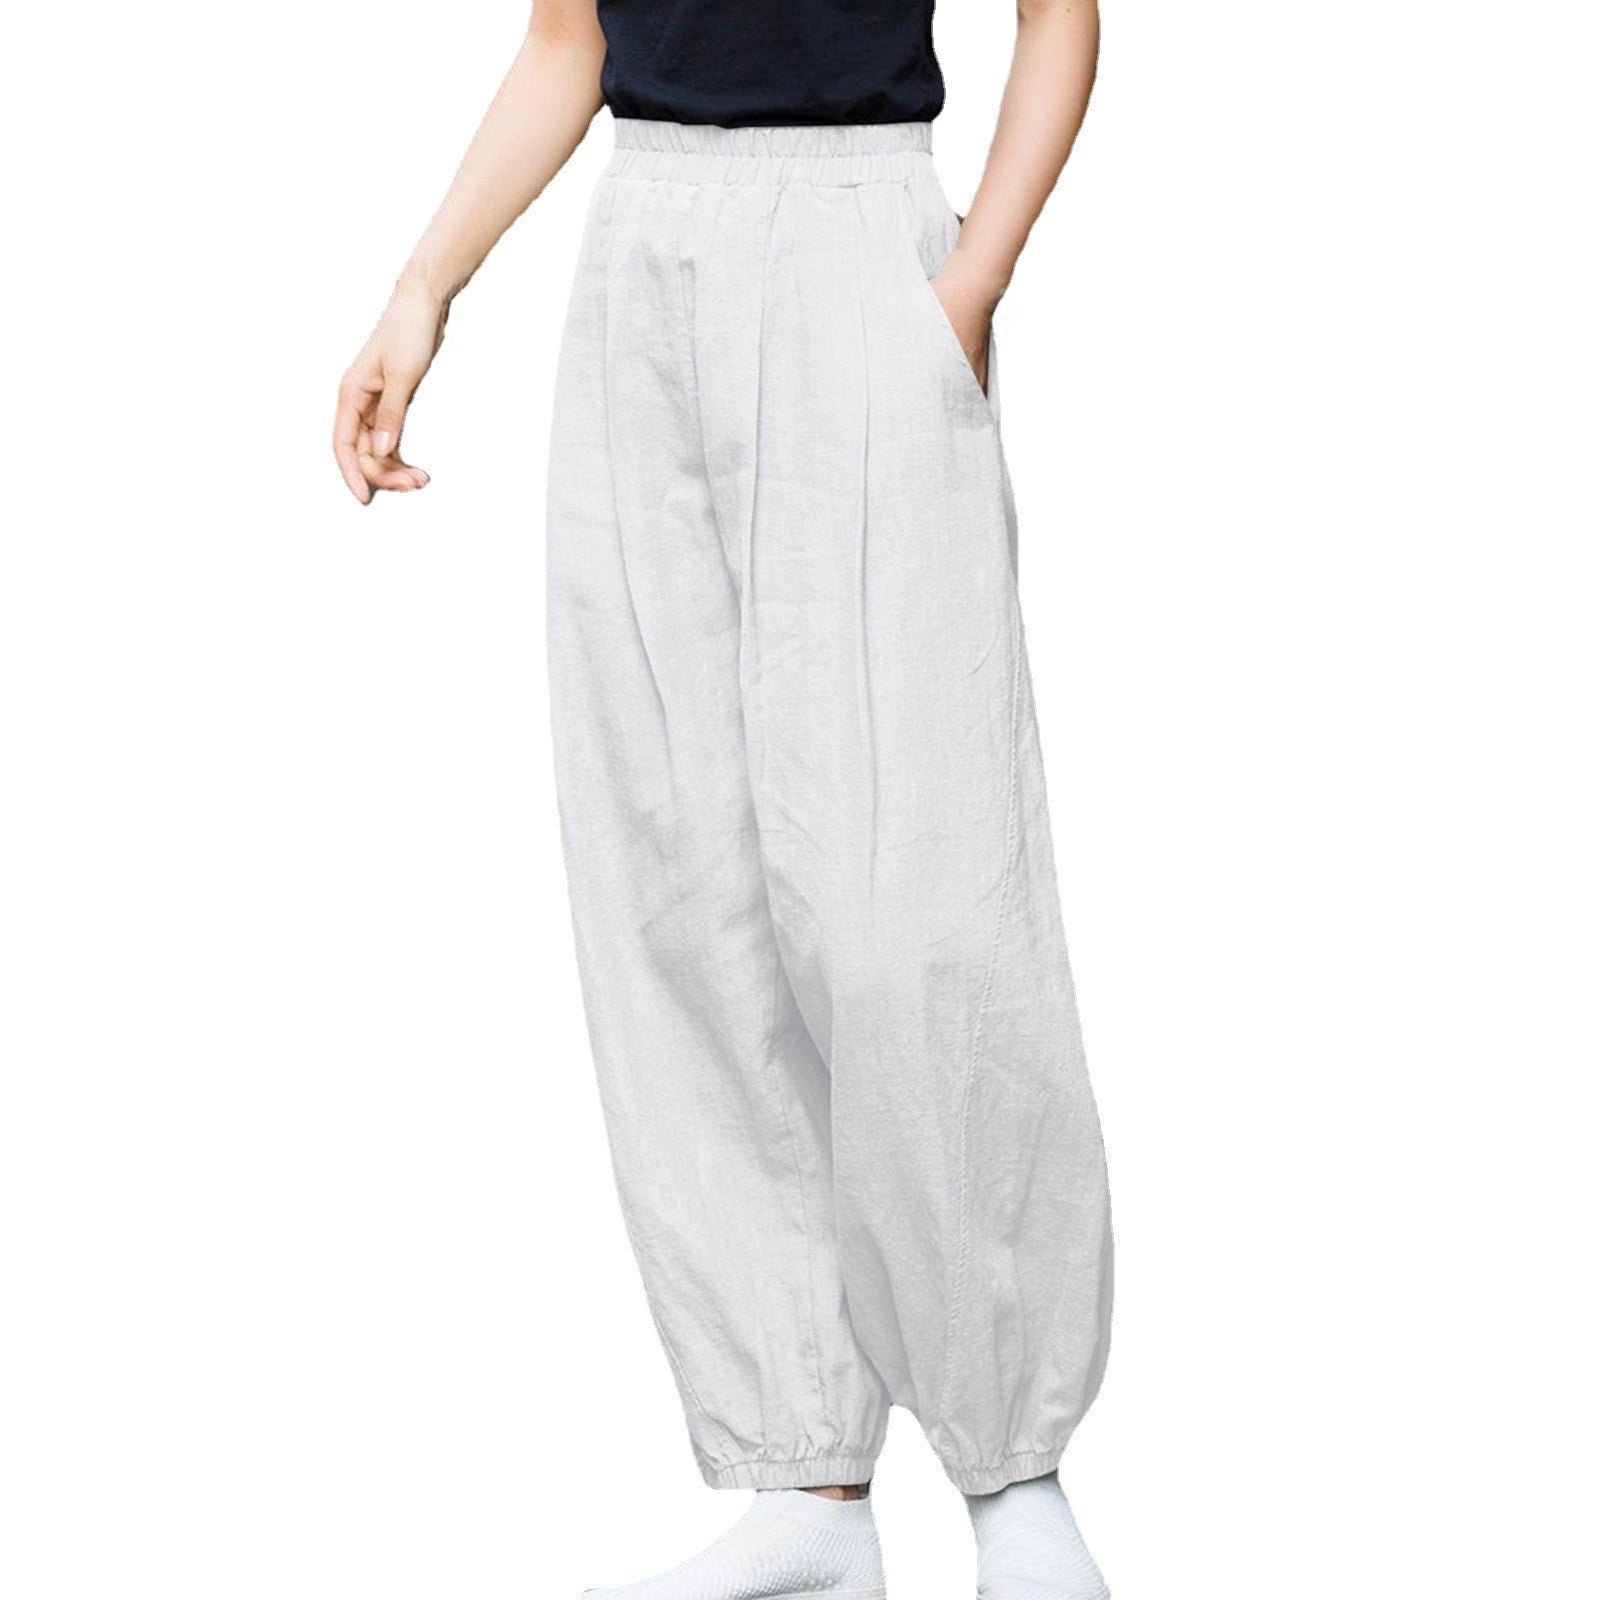 SSAAVKUY Womens Cotton And Linen Pants Summer Casual Slim